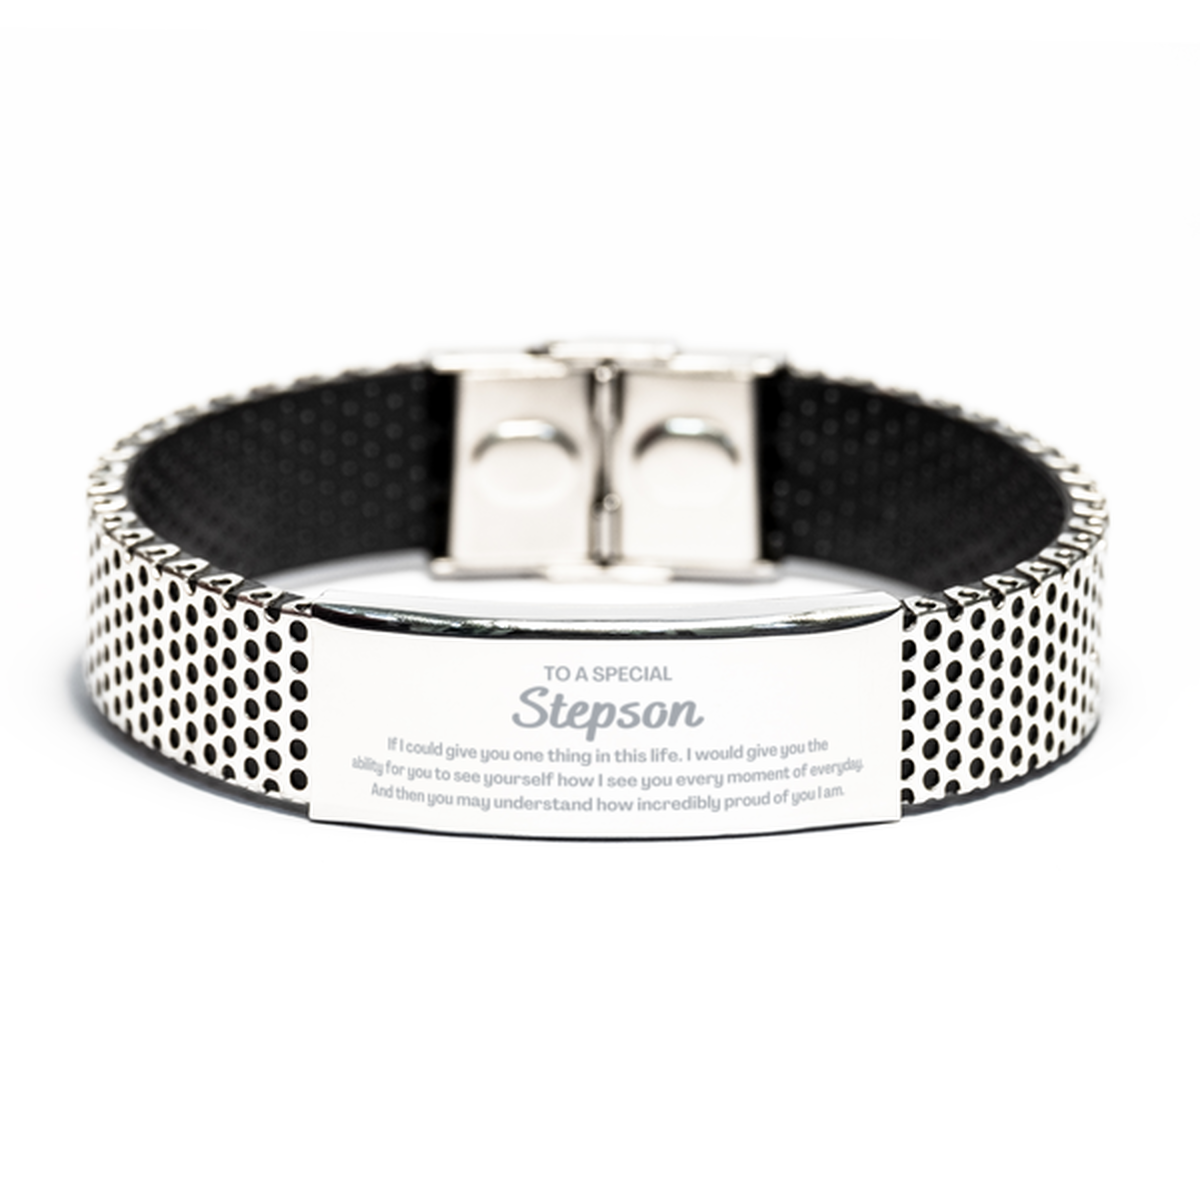 To My Stepson Stainless Steel Bracelet, Gifts For Stepson Engraved, Inspirational Gifts for Christmas Birthday, Epic Gifts for Stepson To A Special Stepson how incredibly proud of you I am